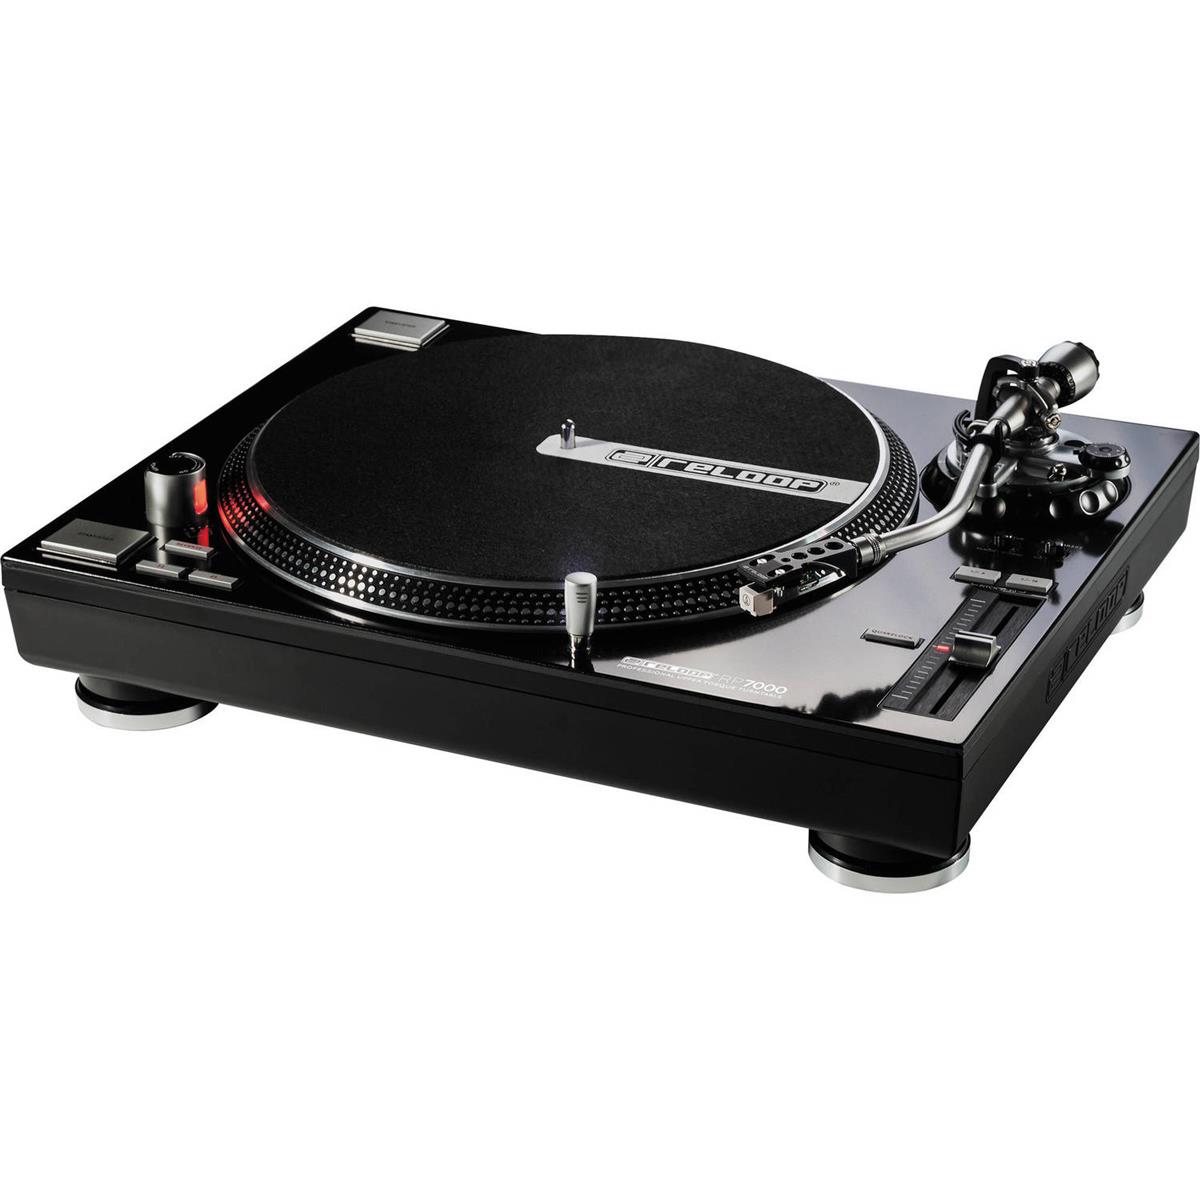 Reloop RP-7000 Direct Drive High Torque Turntable, High Gloss Black -  AMS-RP-7000